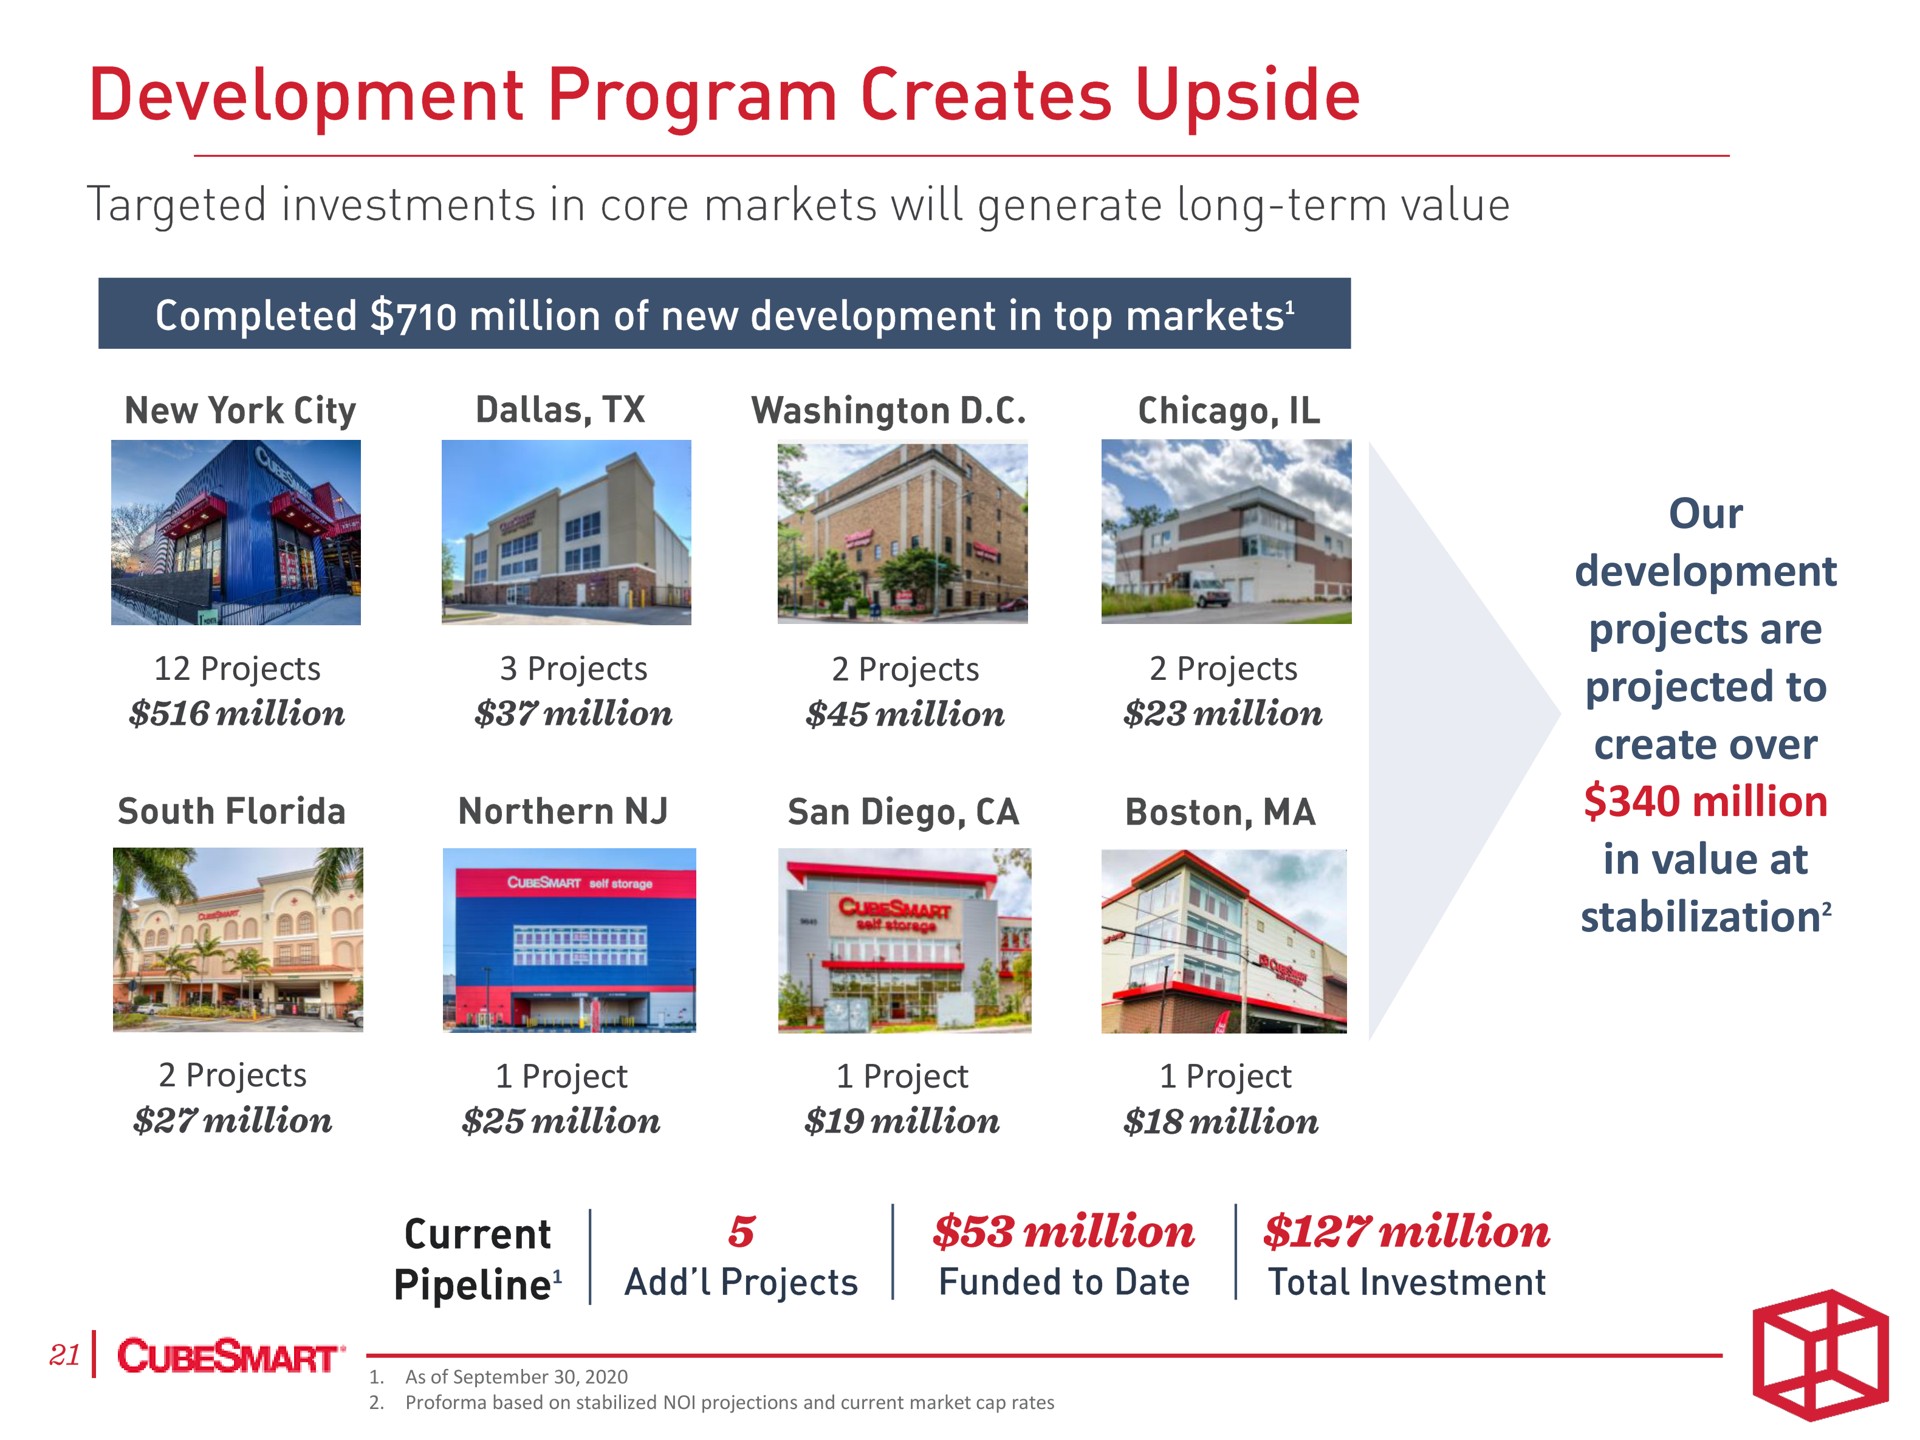 projects projects projects projects projects project project project our development projects are projected to create over million in value at stabilization program creates upside | CubeSmart